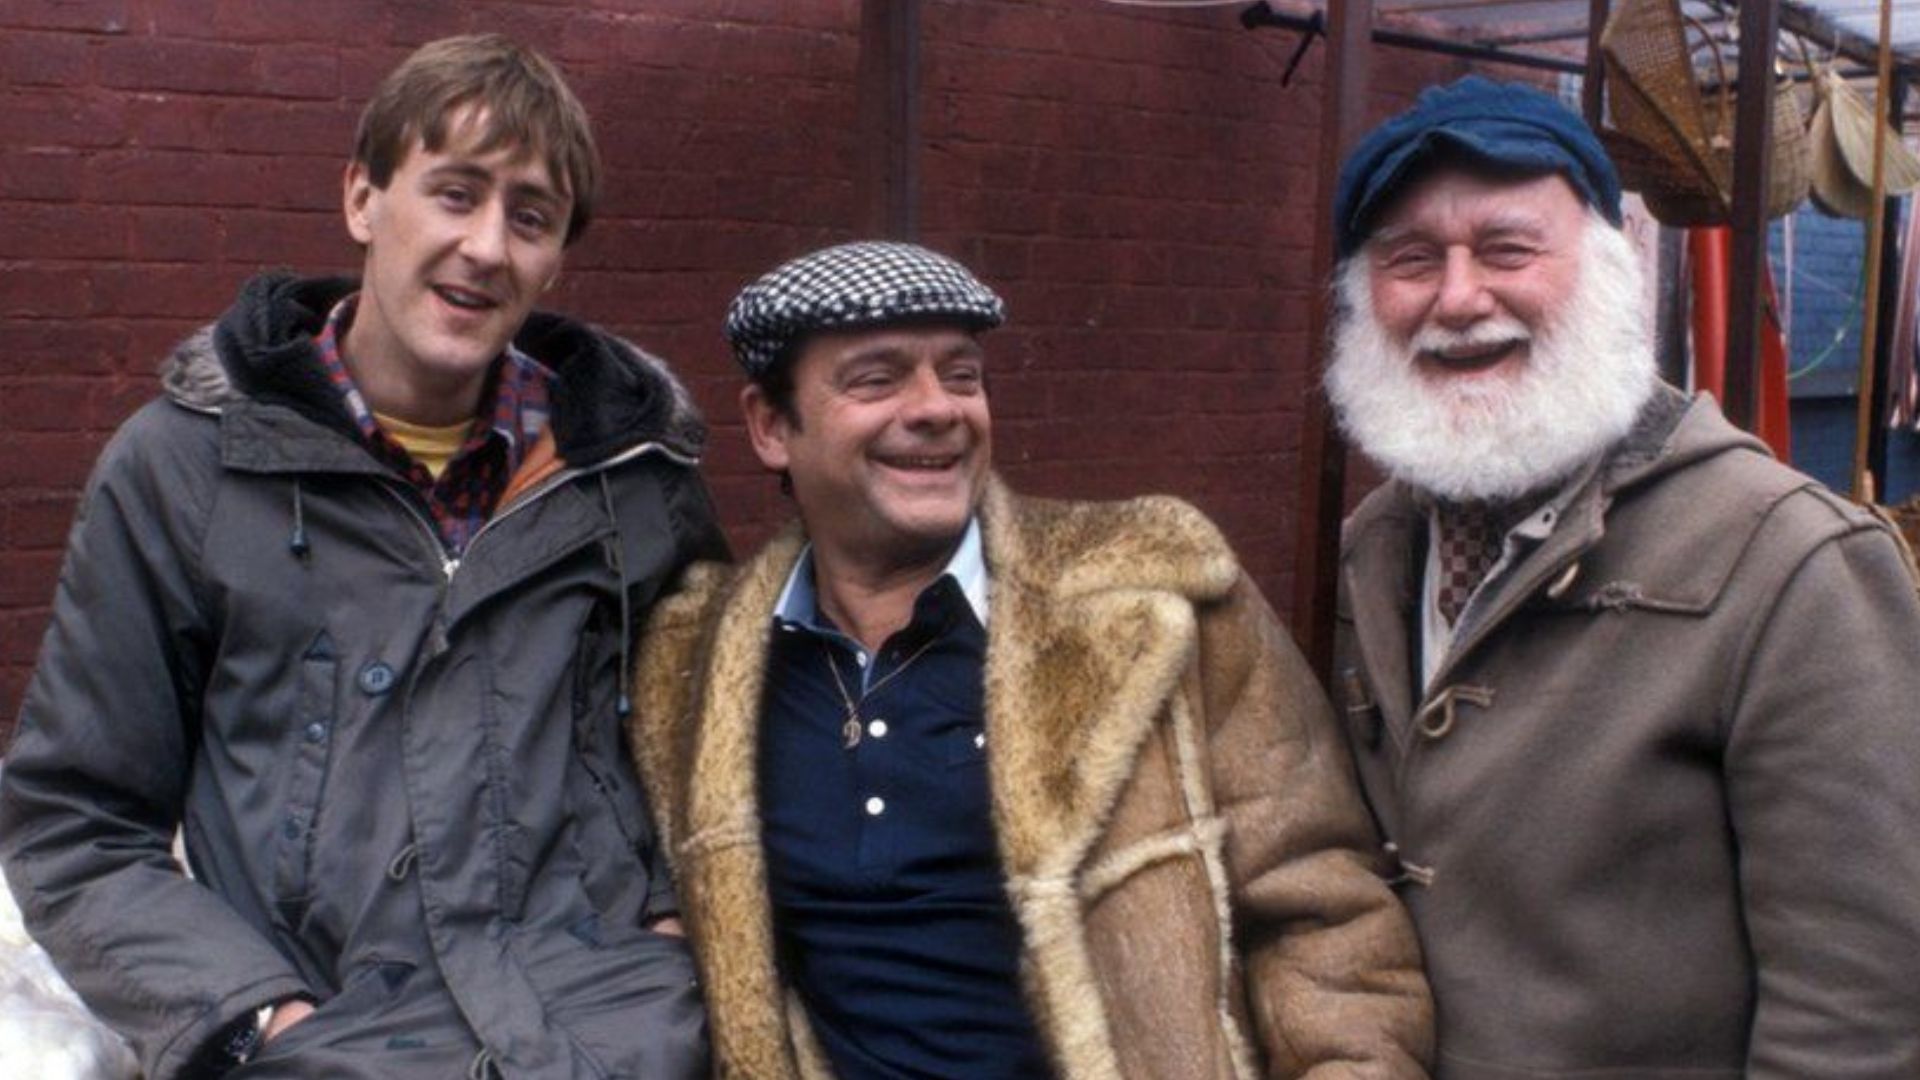 Banned Only Fools and Horses Episode - Del Boy Too Mean? Why Writer John Sullivan Banned One Only Fools and Horses Episode